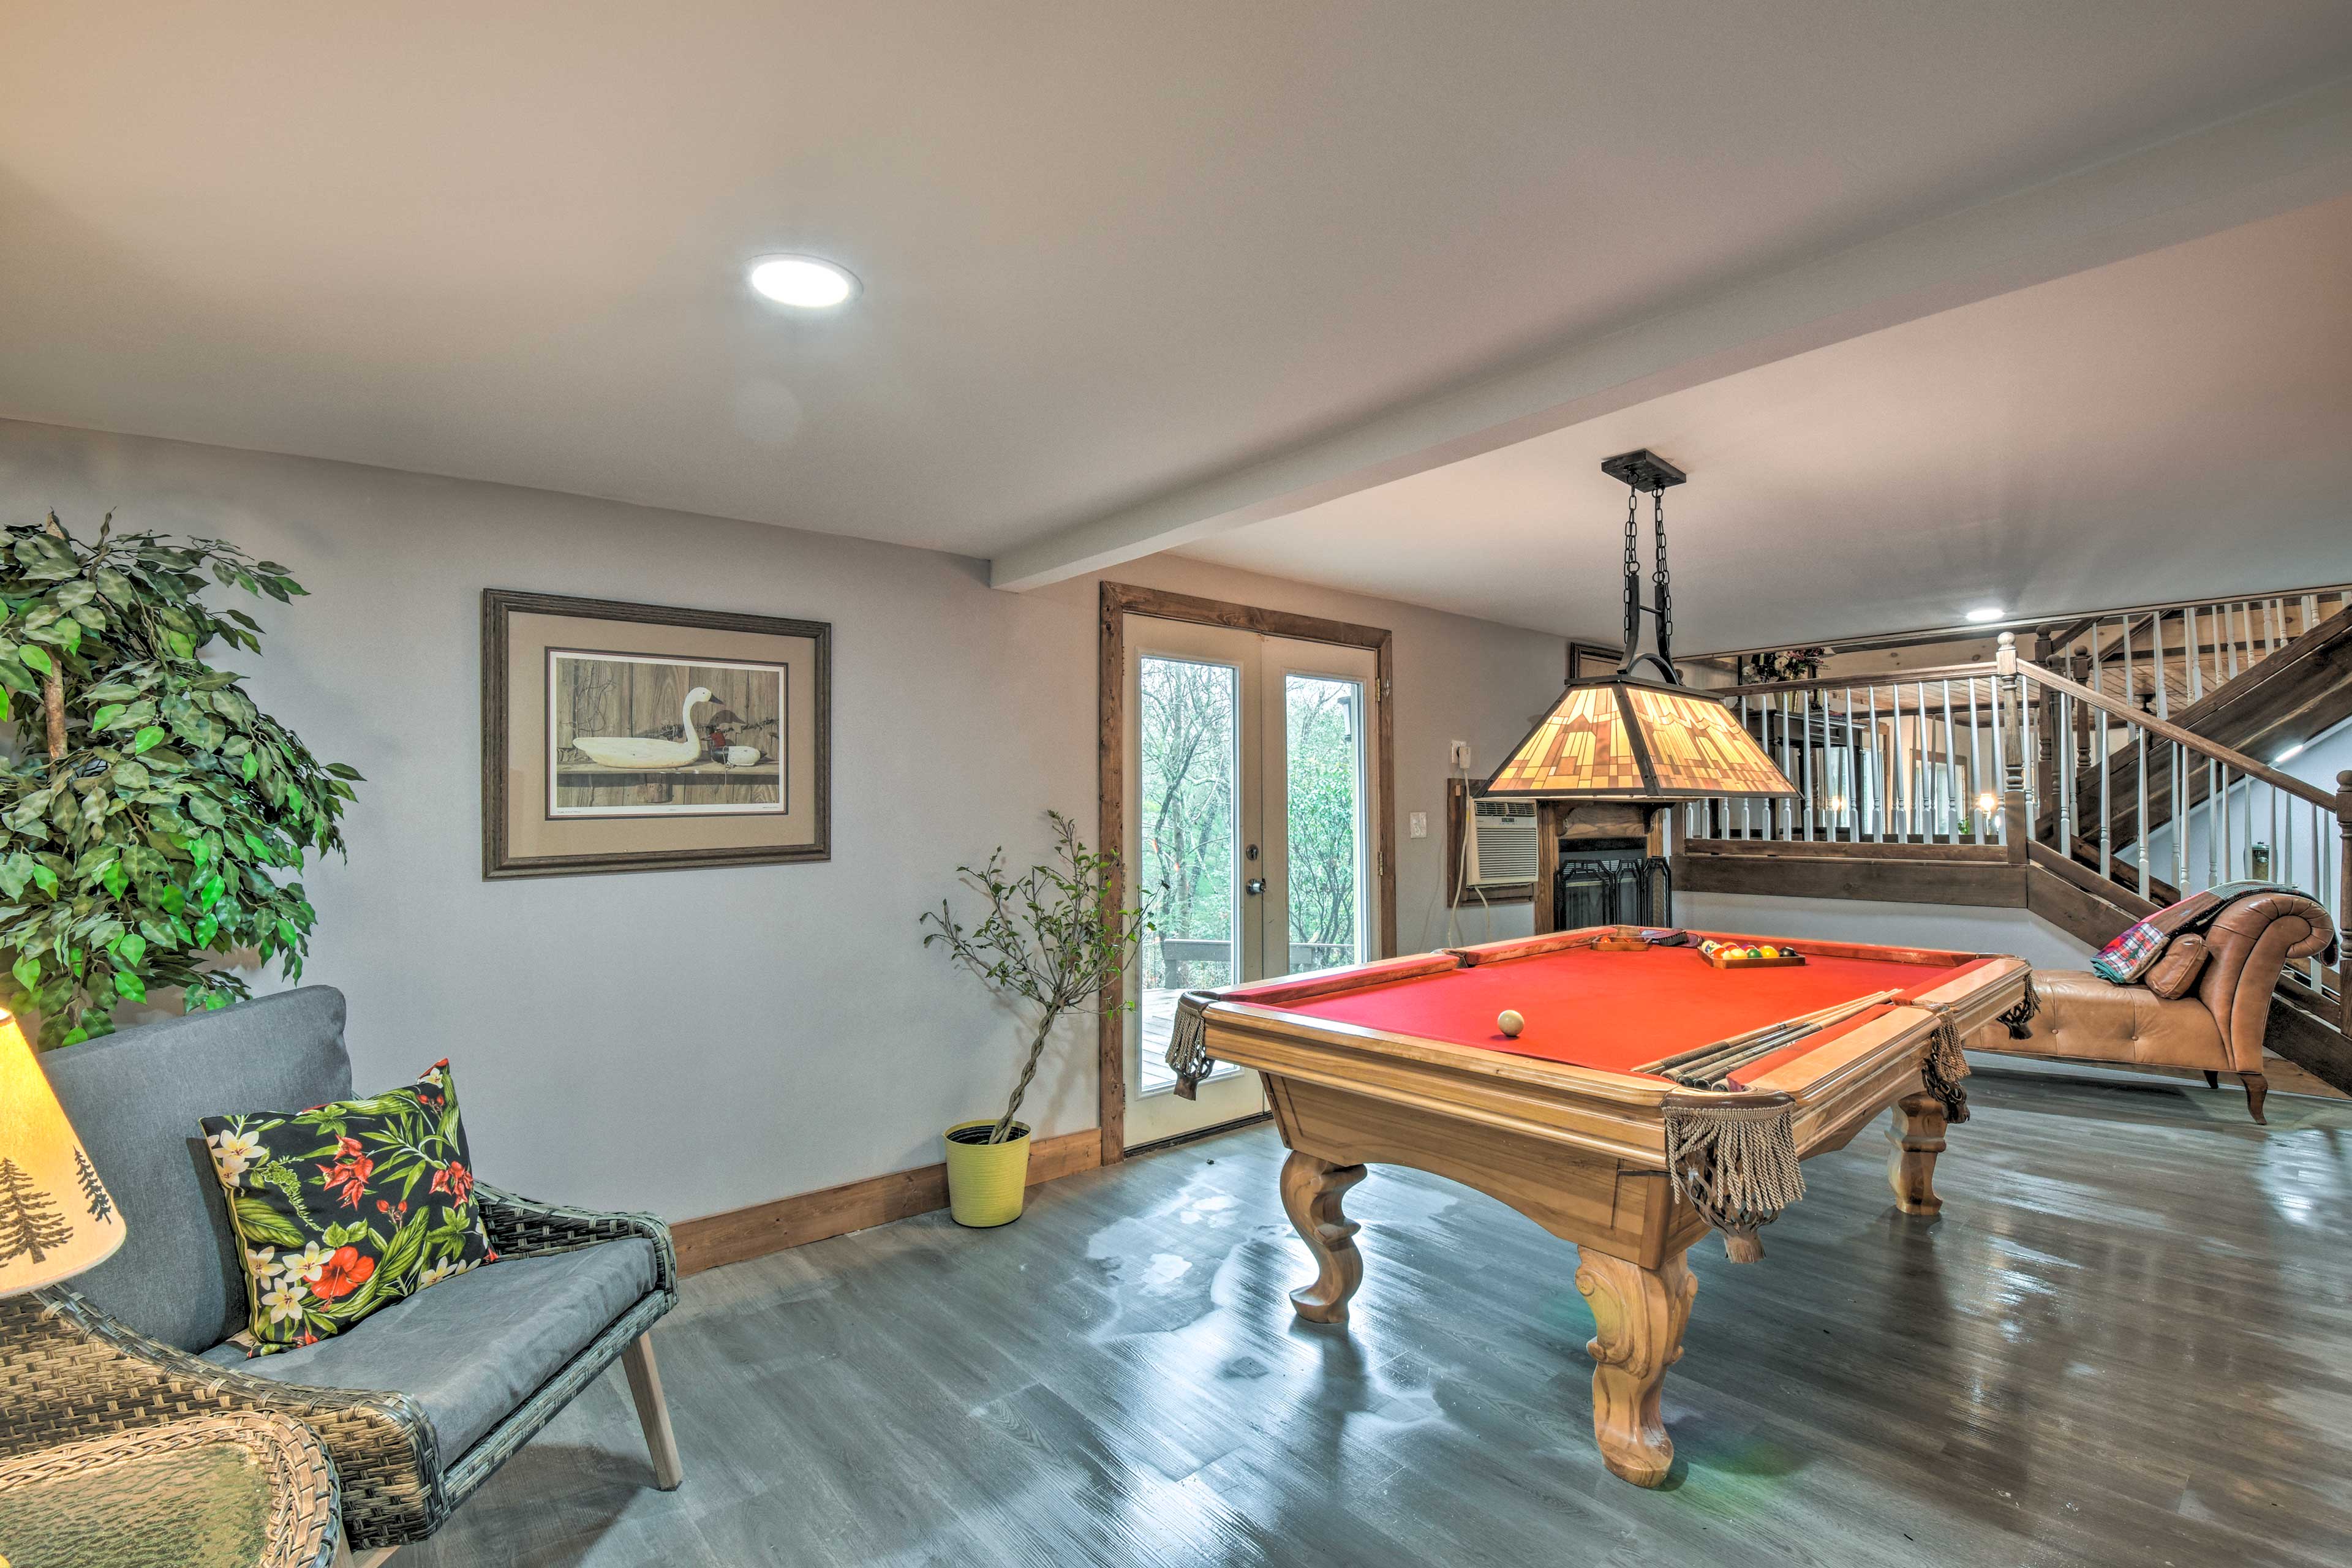 Game Room | Pool Table | Ping-Pong Table | Wood-Burning Fireplace | 1st Floor